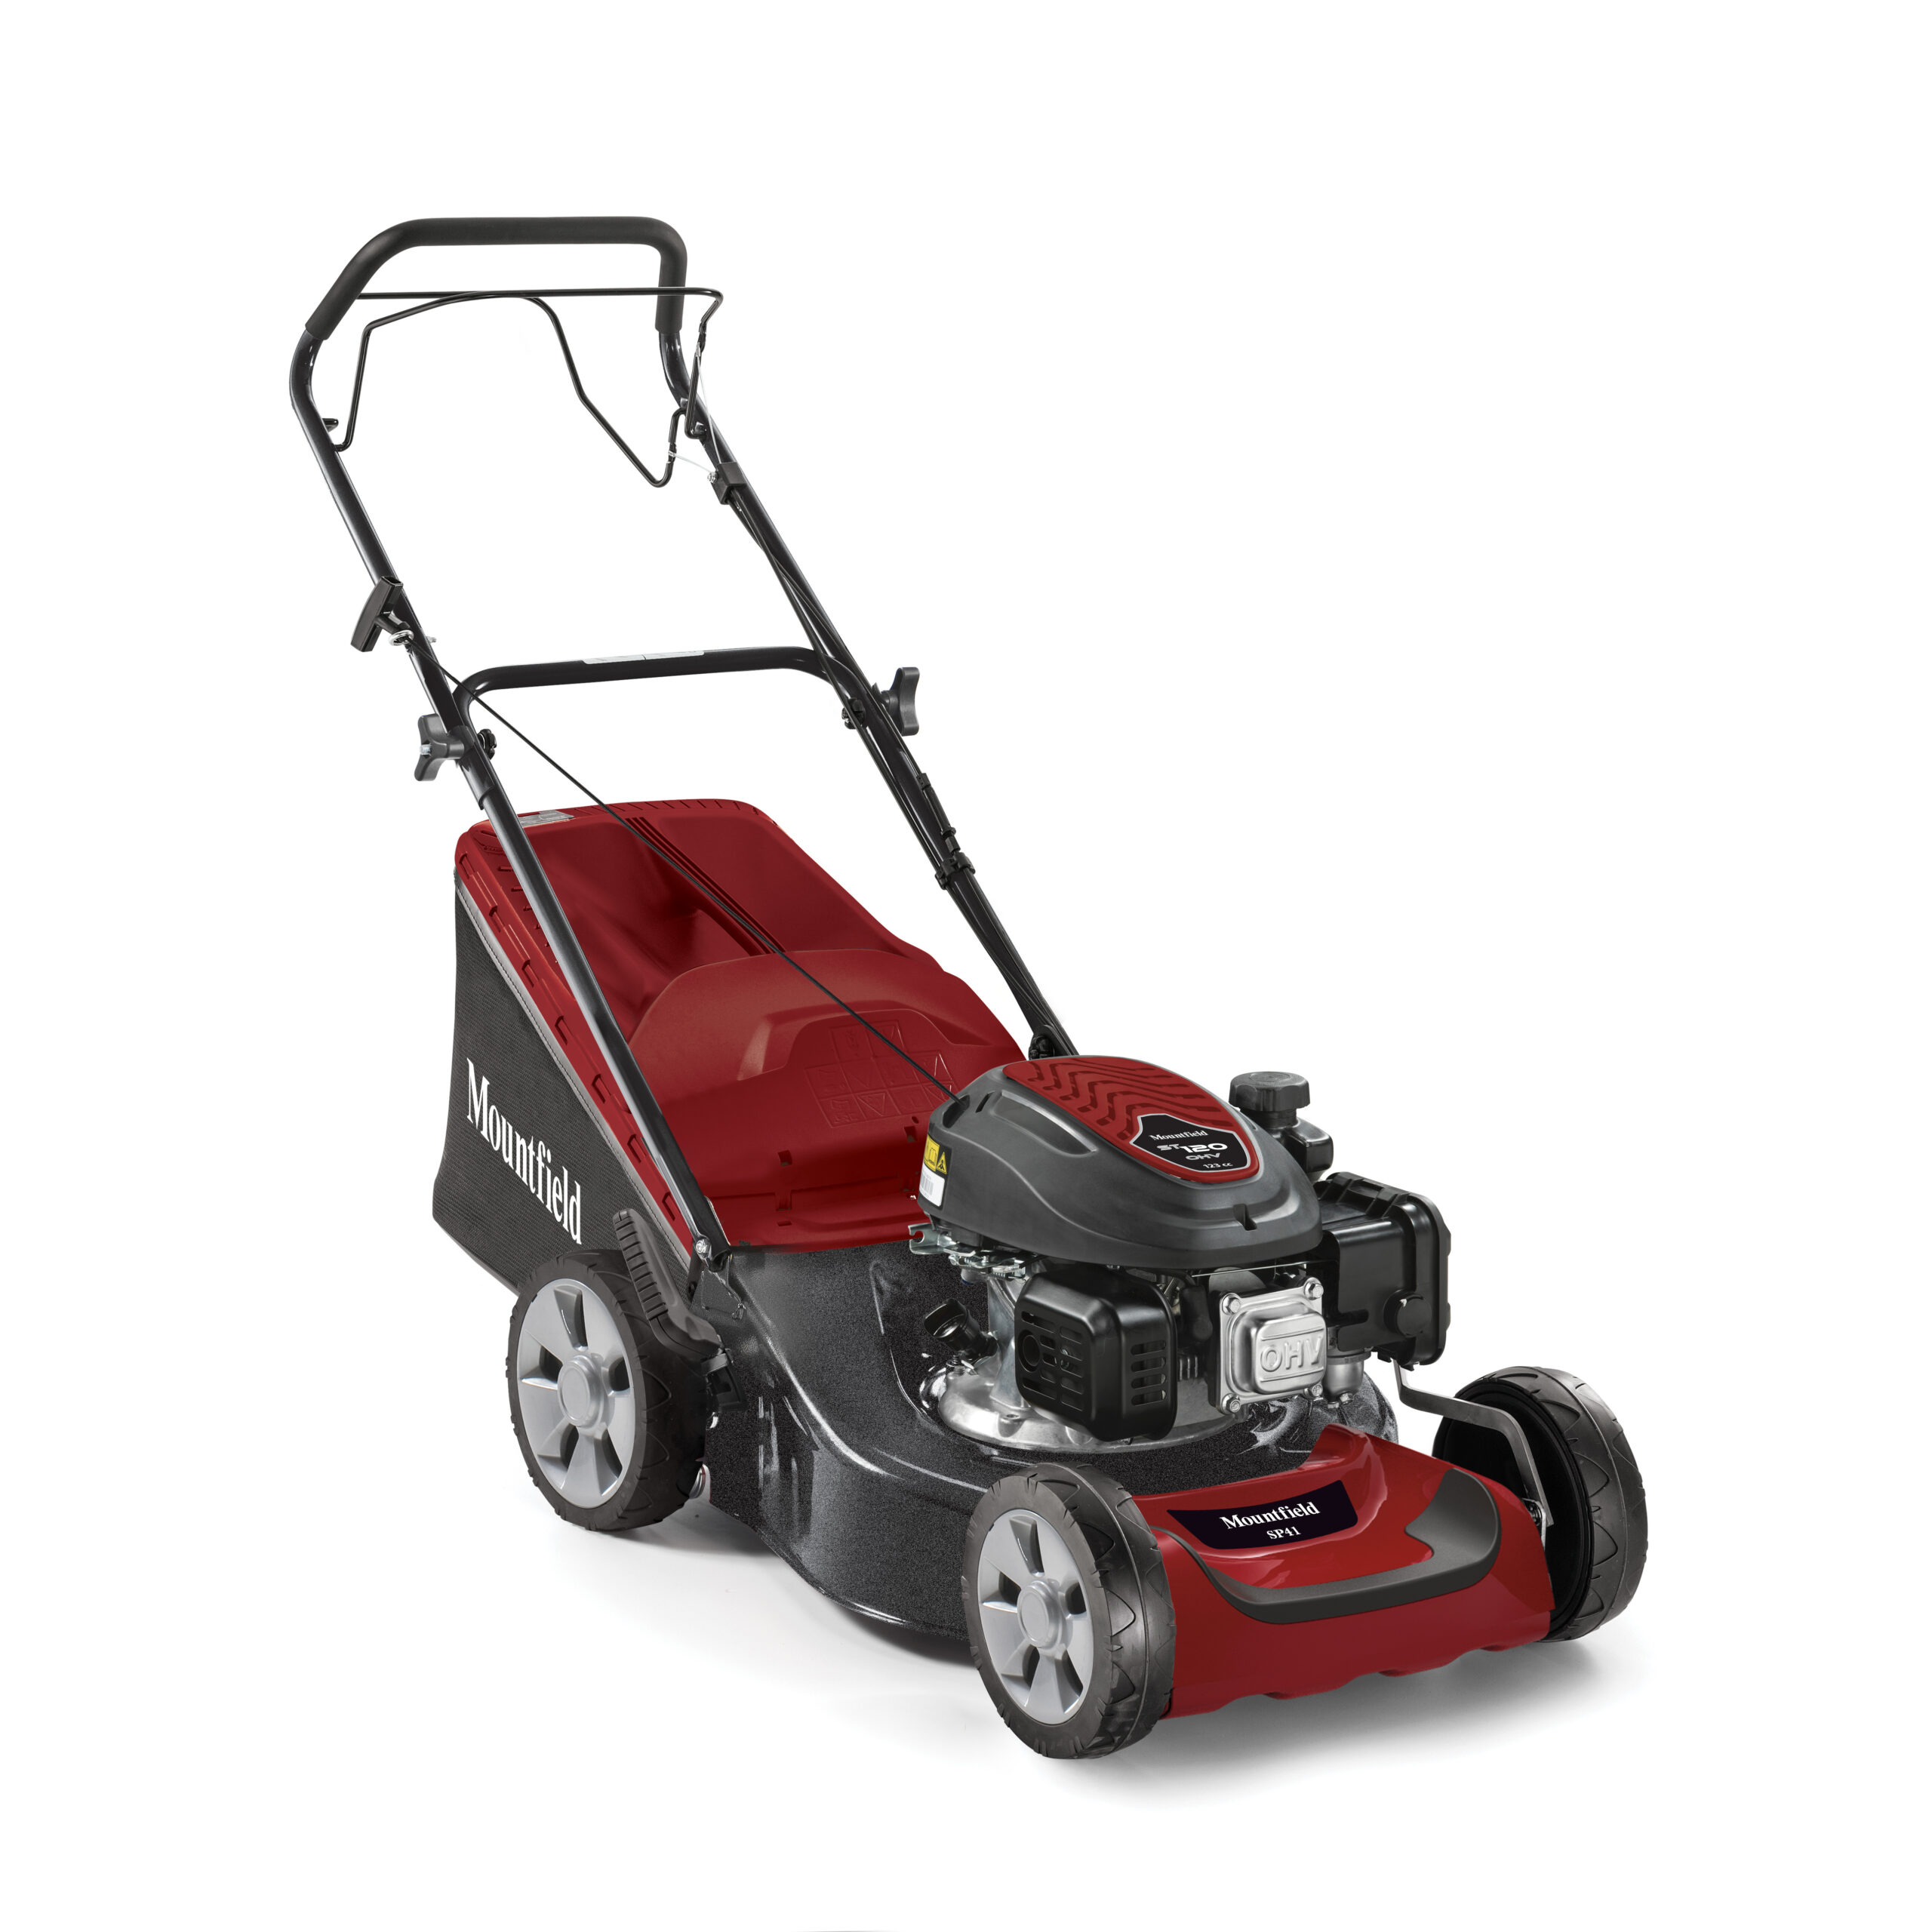 Product image for mountfield walk behind mower model SP42